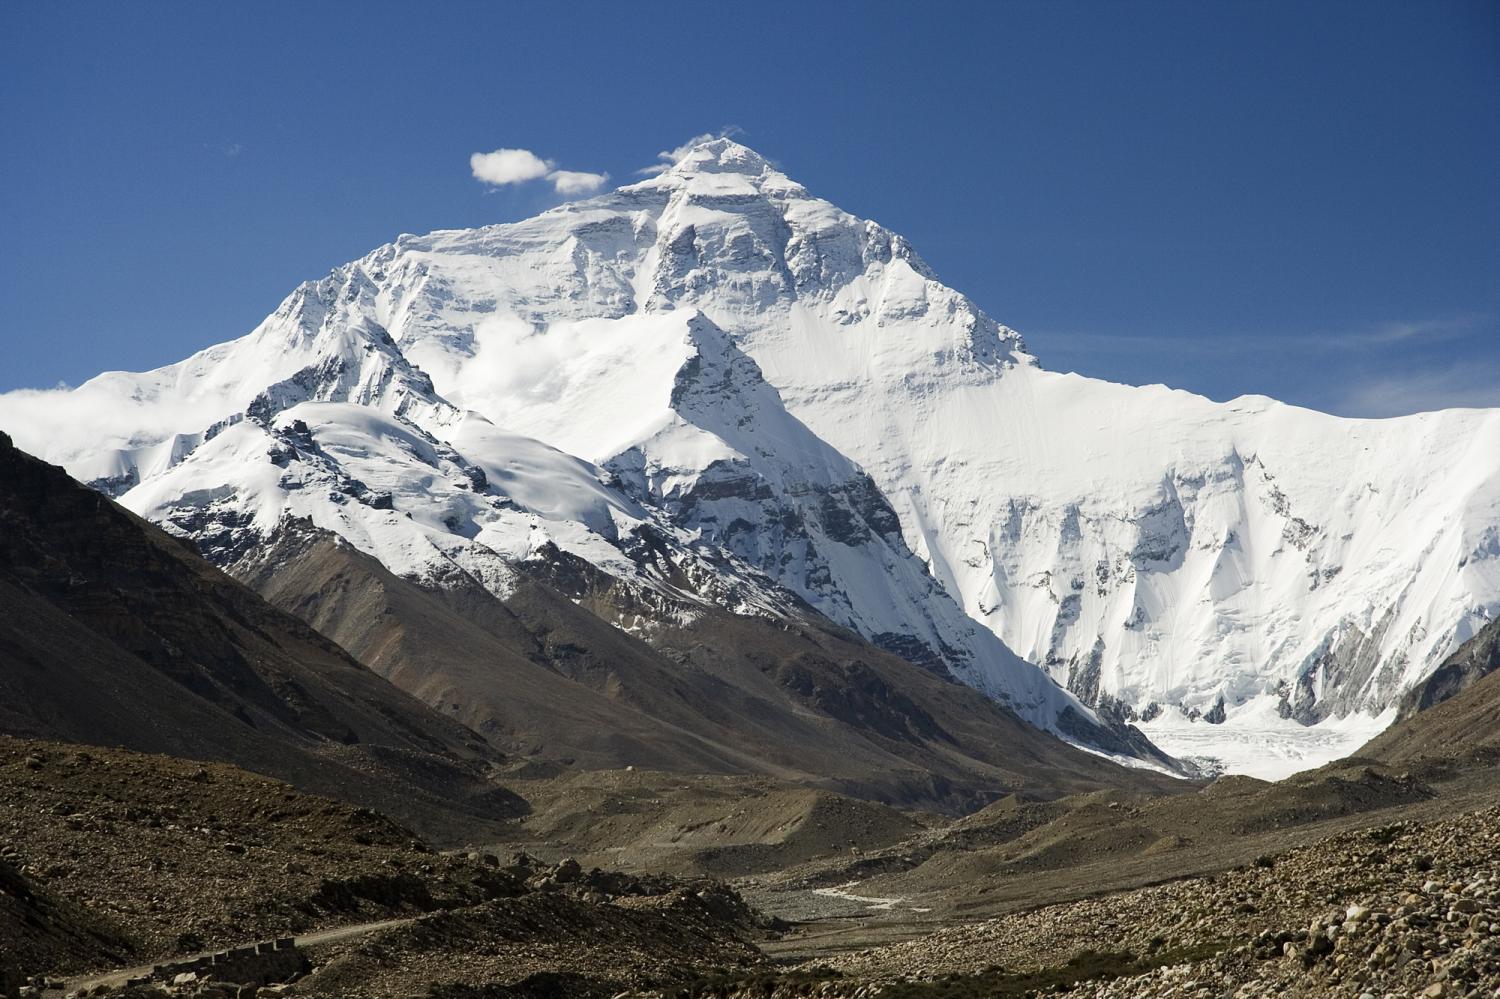 21 Nepali nationals leave for Tibet to scale Mt. Everest from Chinese side